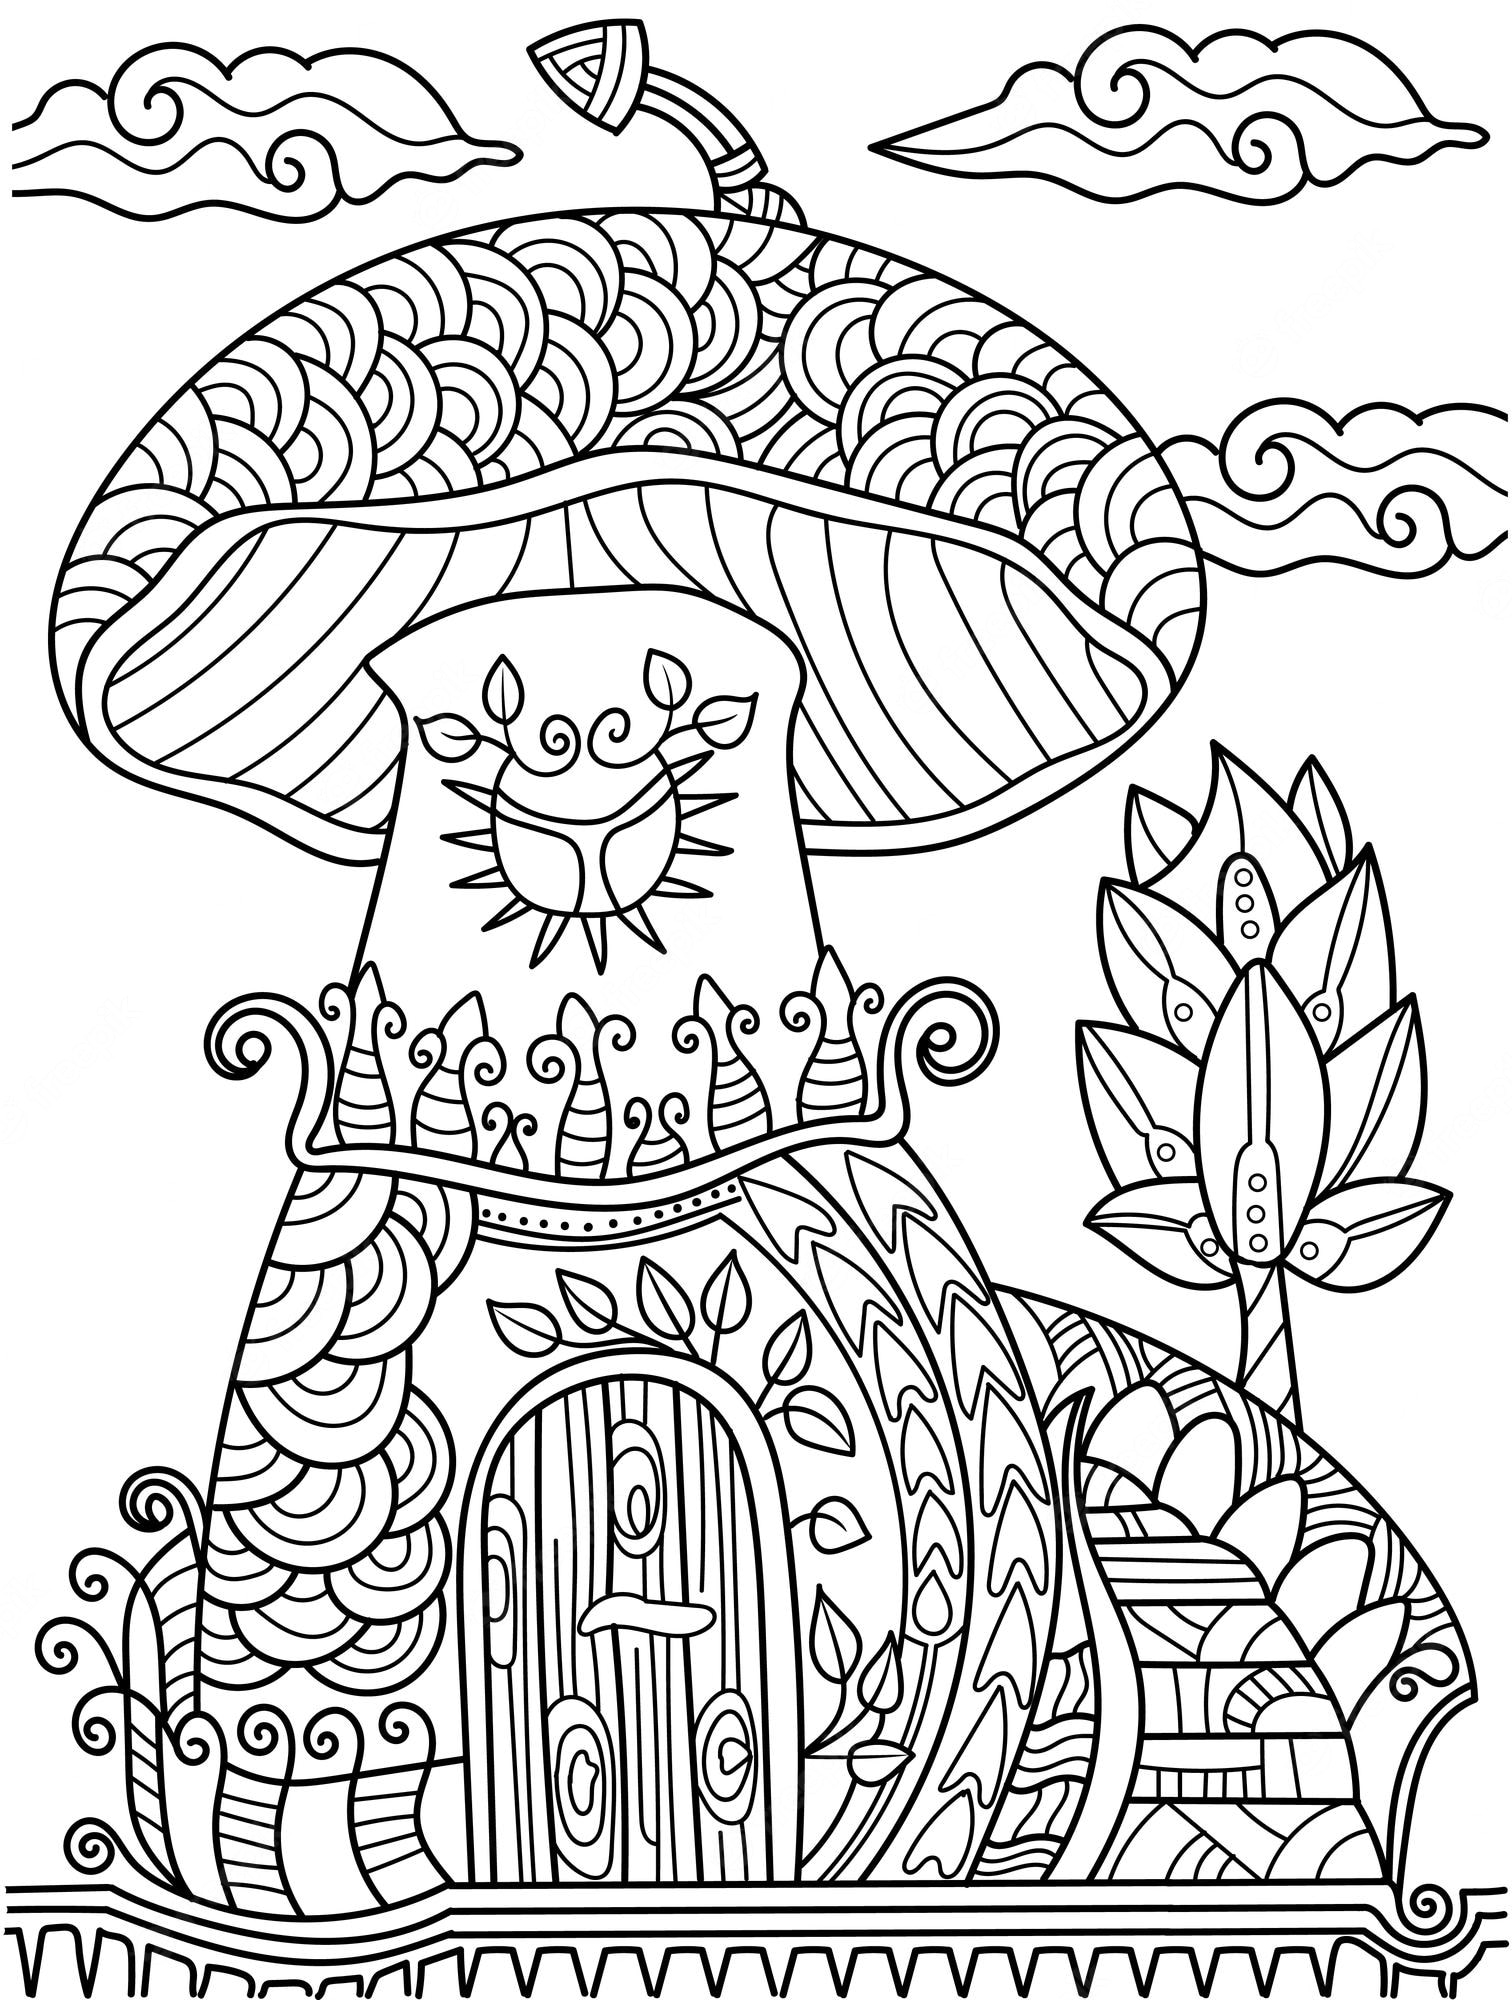 Premium Vector | Mushroom magical house coloring page